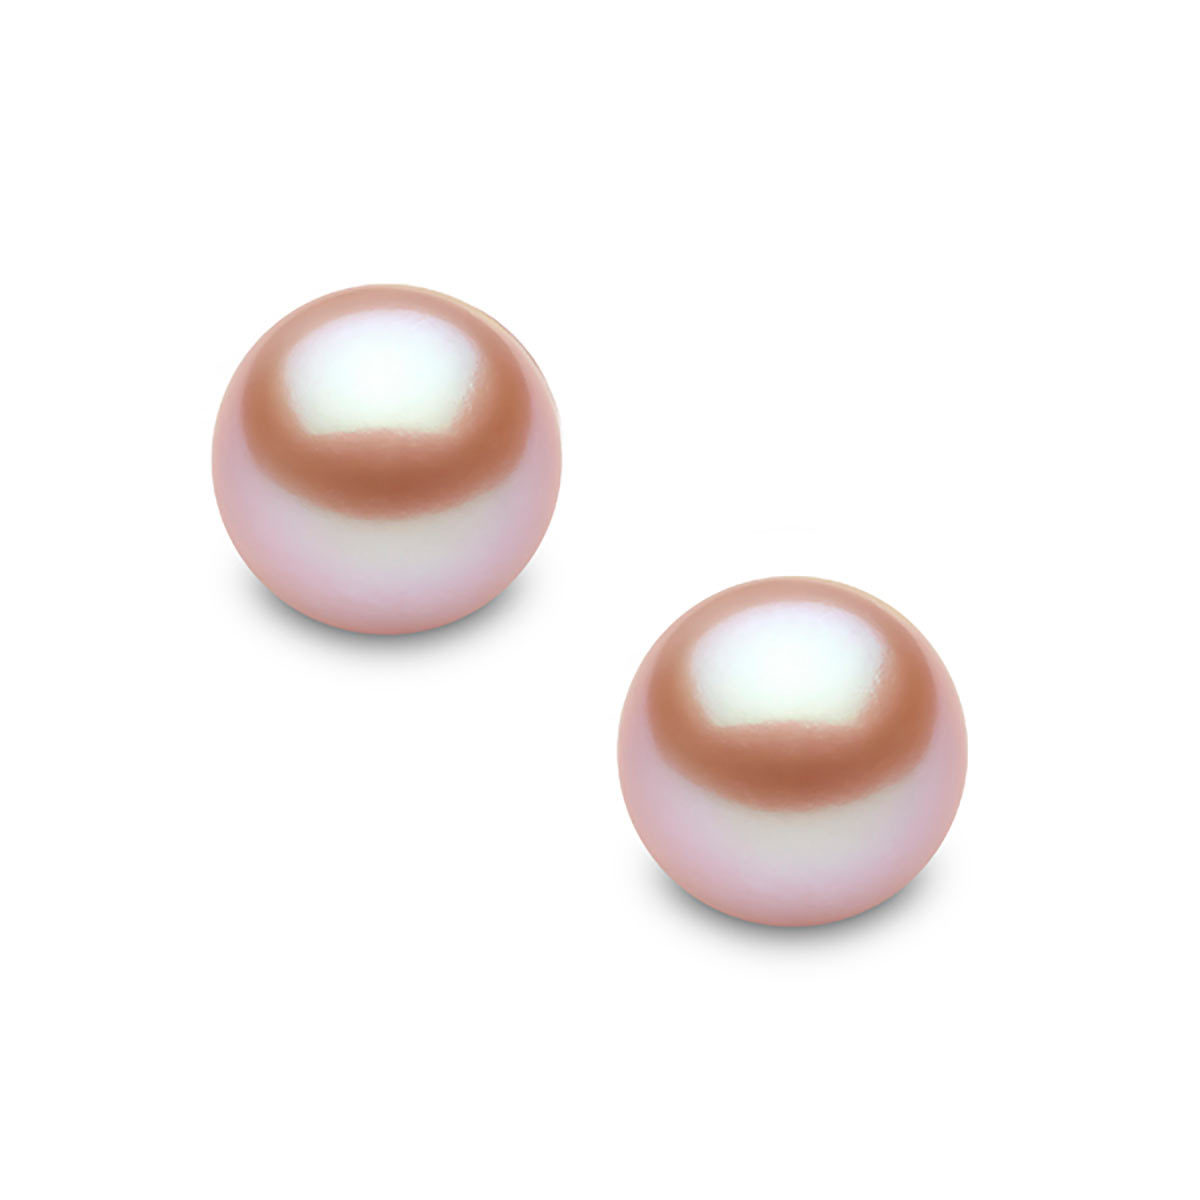 6.5-7mm Cultured Freshwater Peach Pearl Stud Earrings, 18ct White Gold